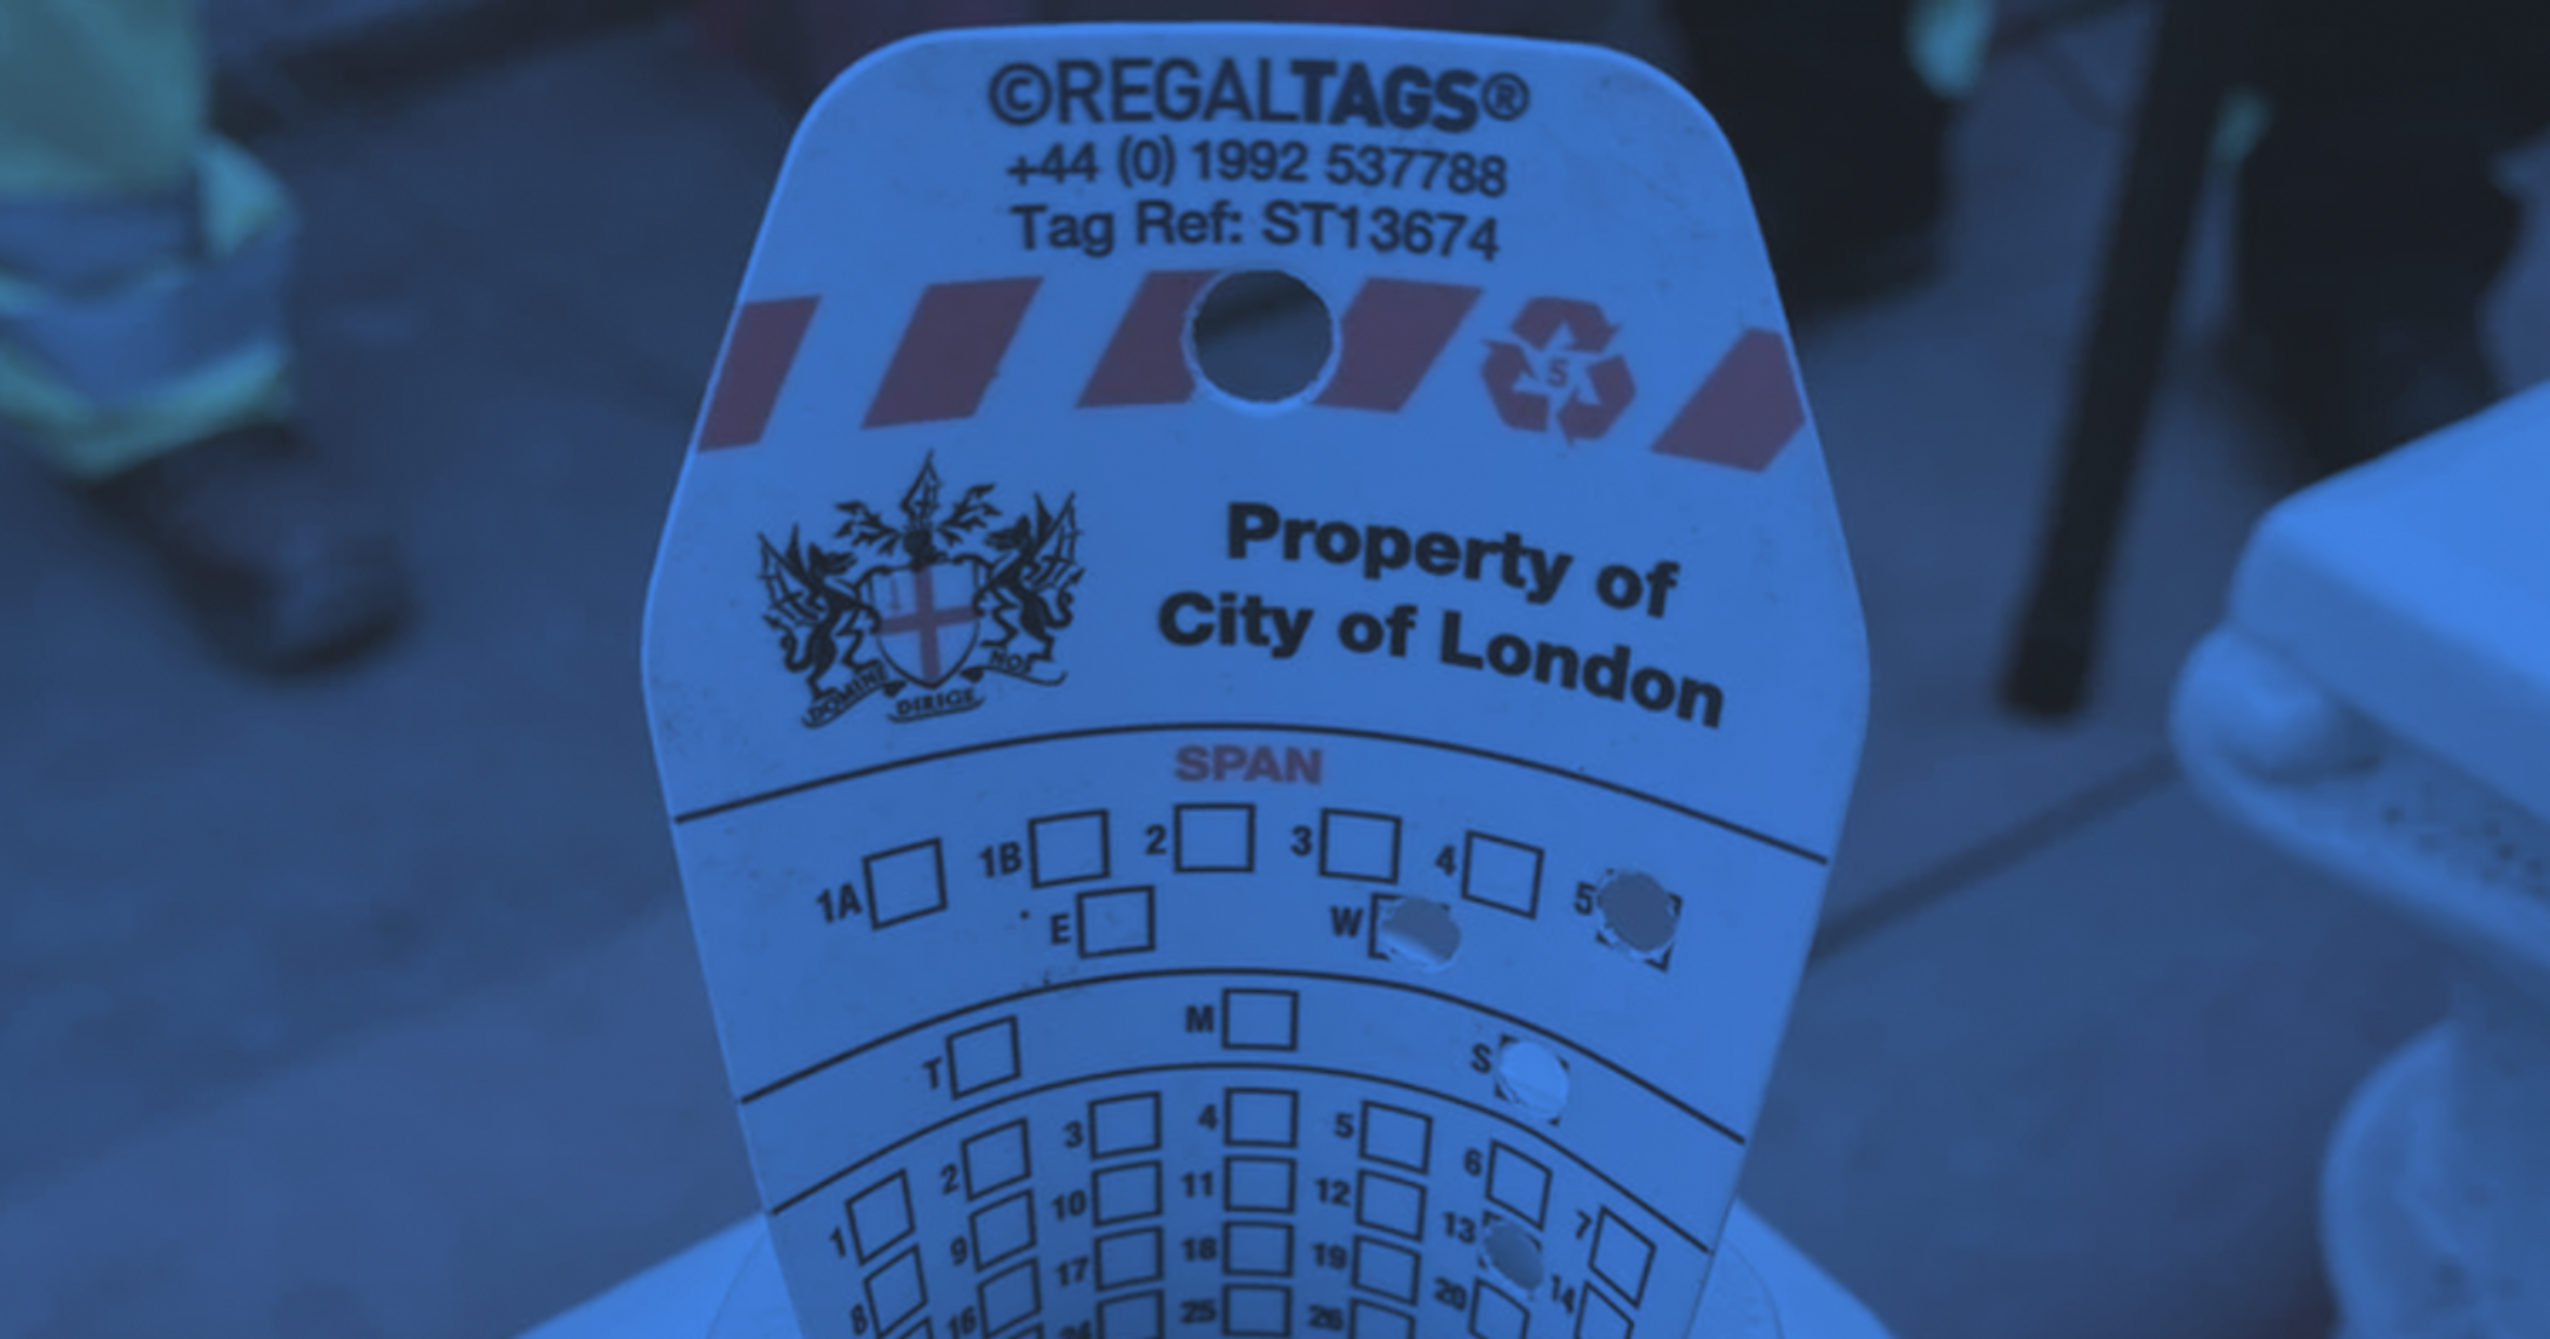 REGALTAGS Safety Tags Play an Important Role in the Restoration of Blackfriars Bridge, London